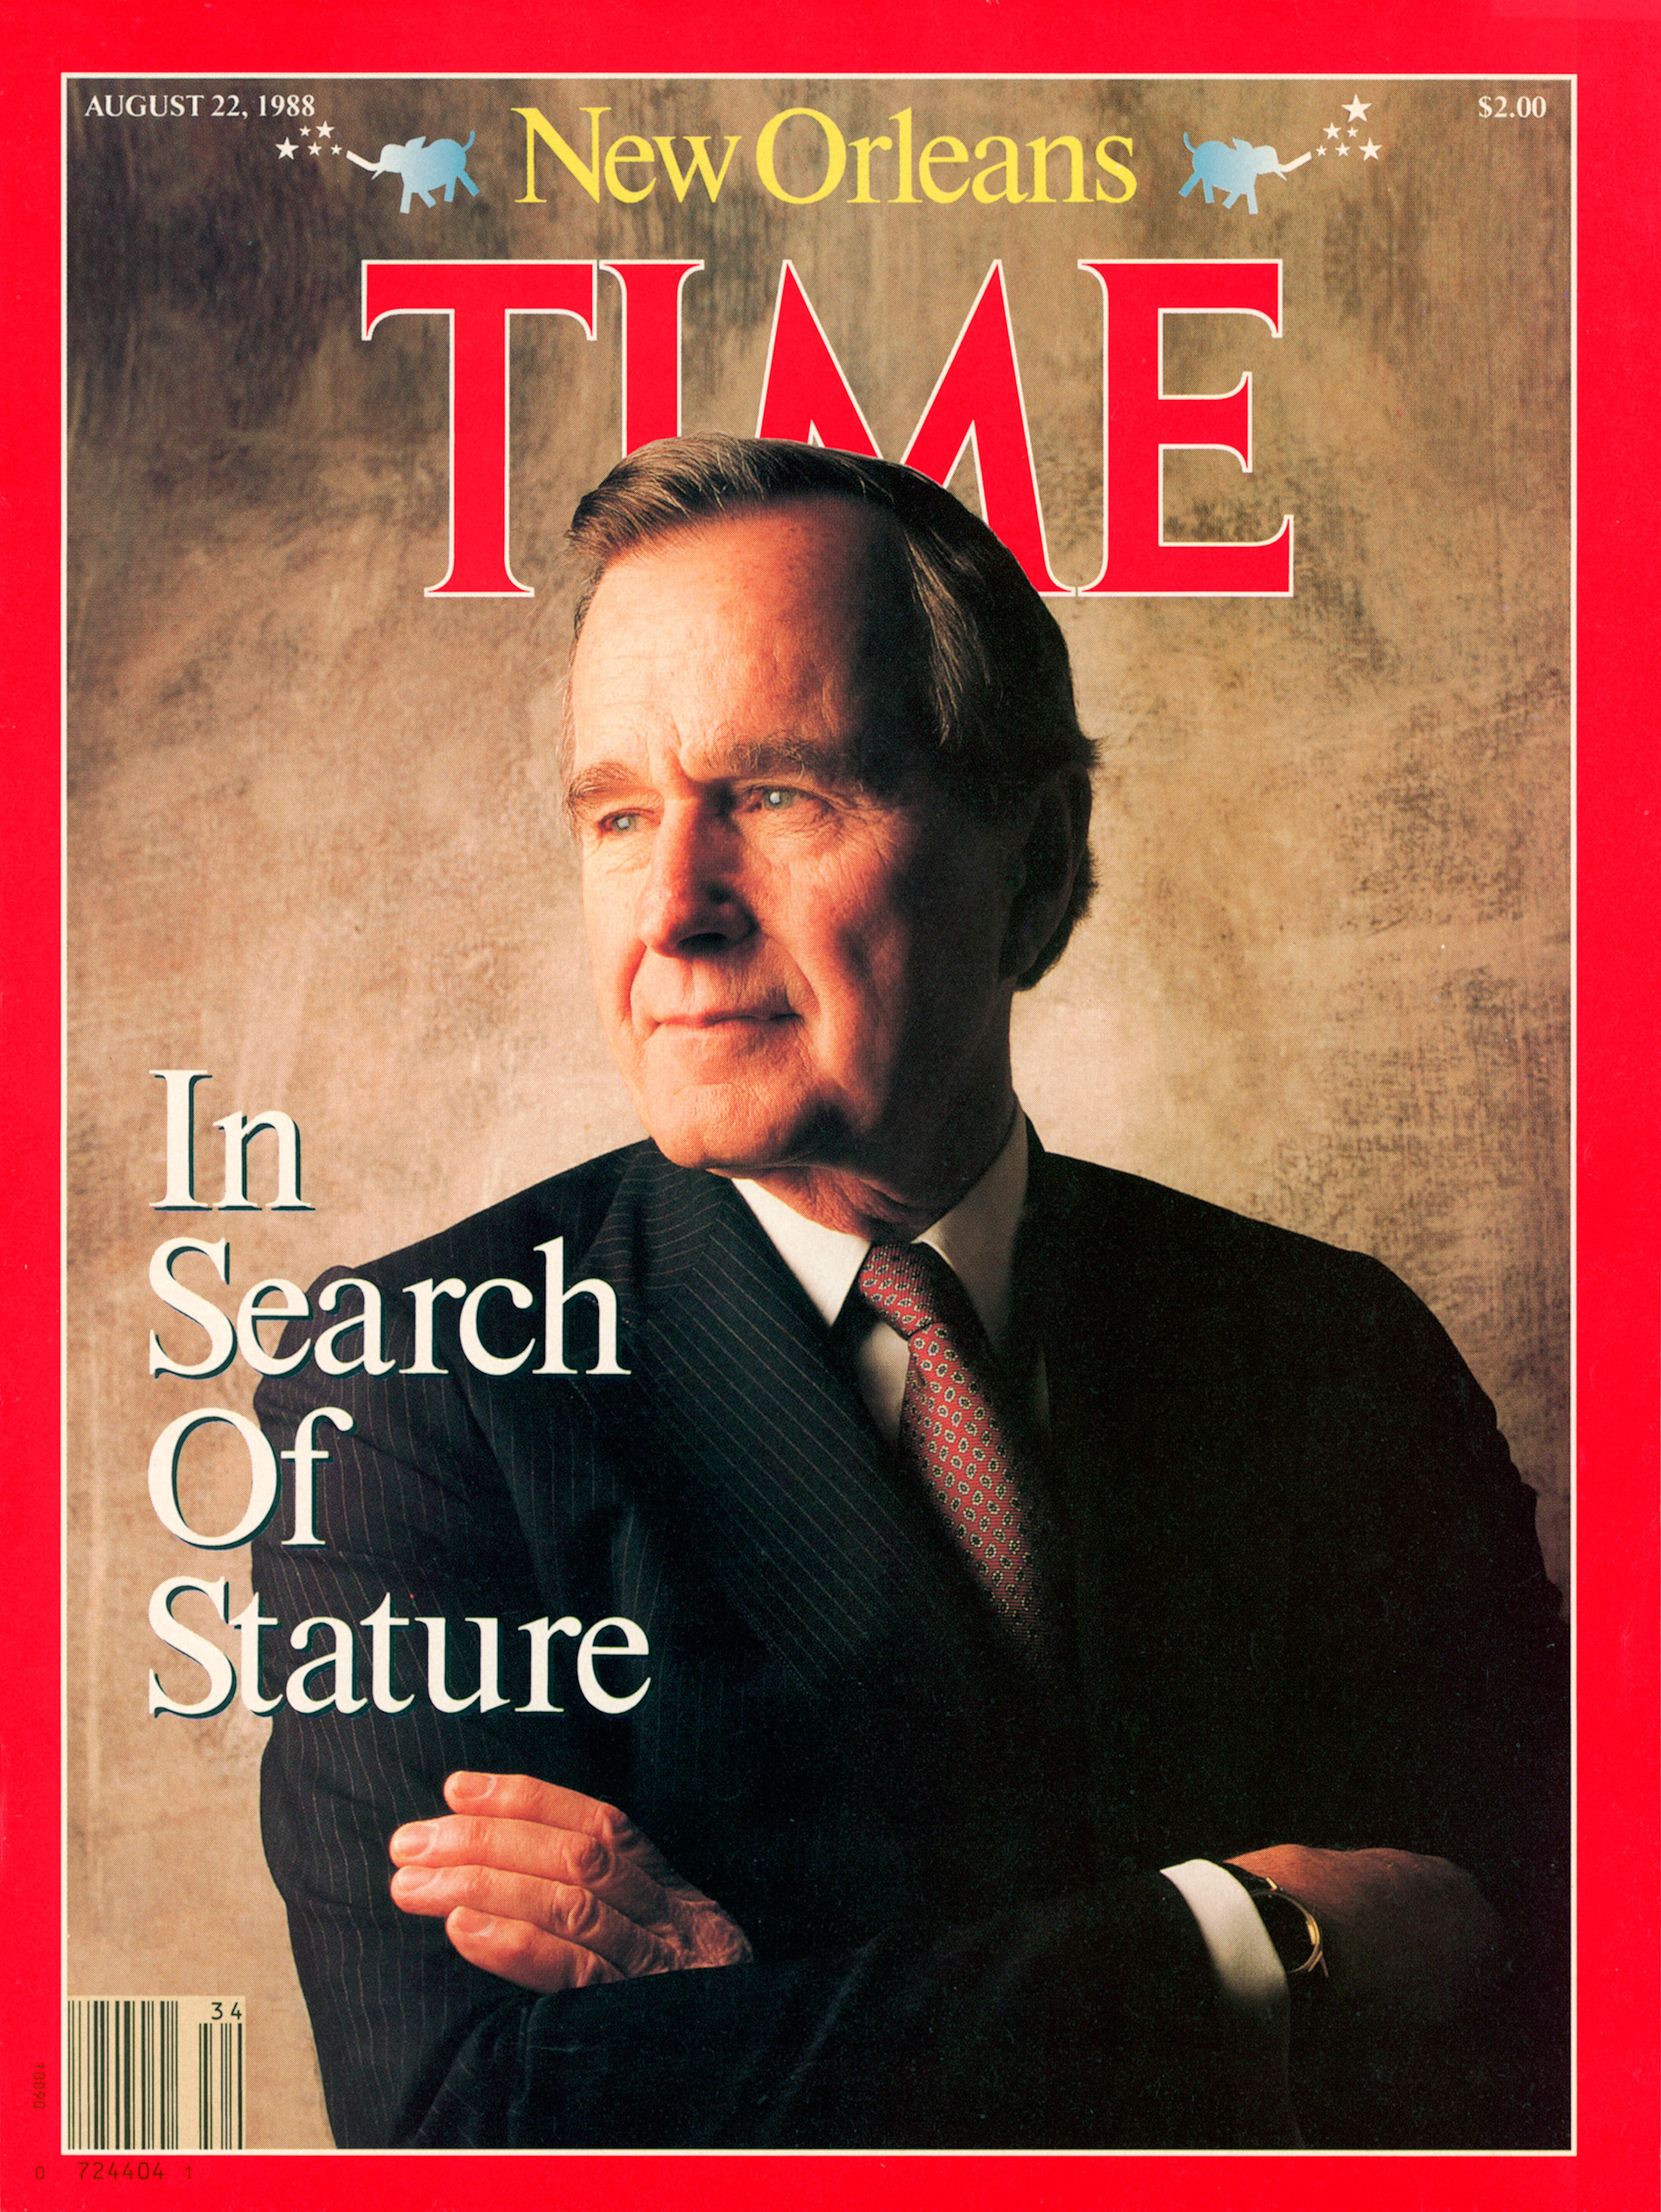 George H.W. Bush on the Aug. 22, 1988, cover of TIME. Cover photo by William Coupon.